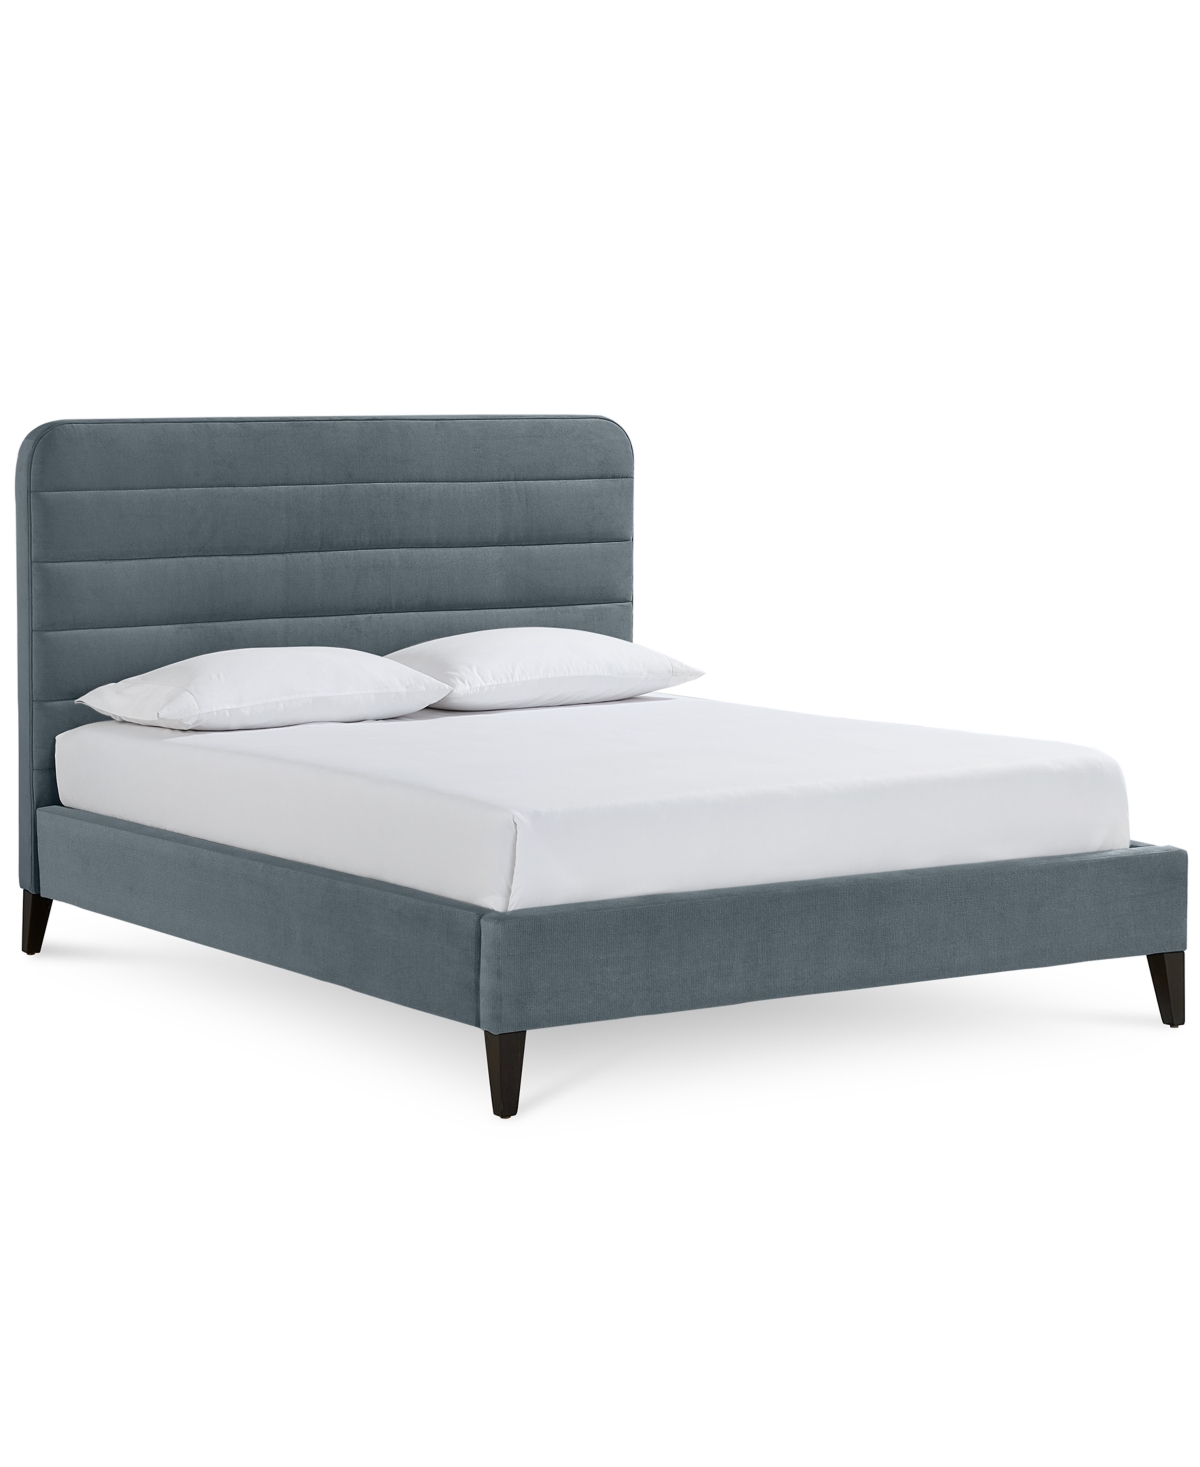 Furniture Haryan Upholstered Queen Bed In Slate